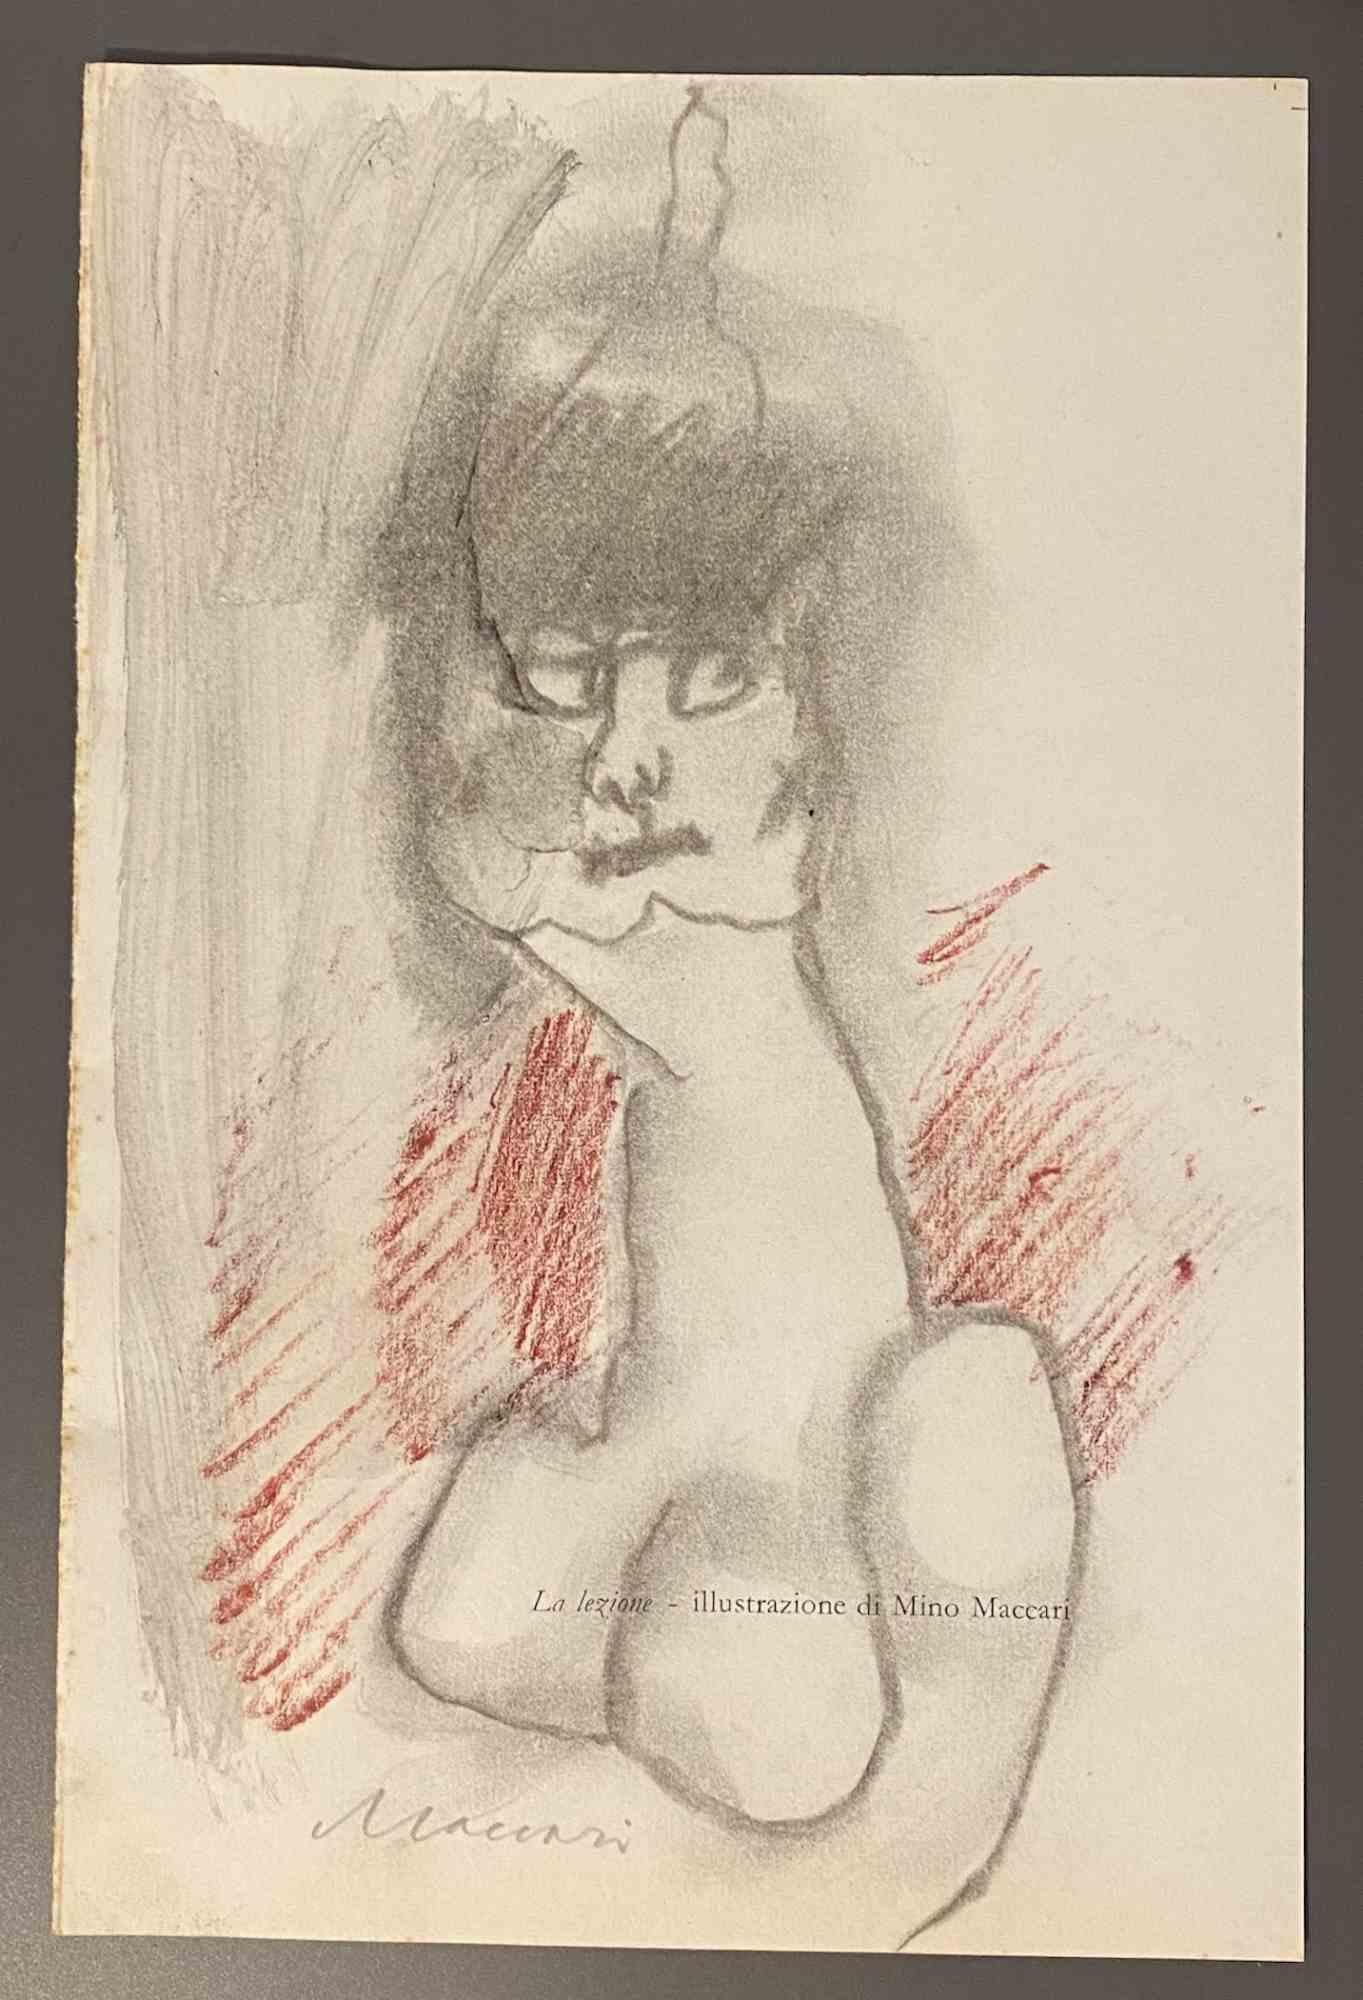 The Lesson is a pen and Pastel Drawing realized by Mino Maccari  (1924-1989) in the 1960s.

Hand-signed on the lower.

Good conditions.

Mino Maccari (Siena, 1924-Rome, June 16, 1989) was an Italian writer, painter, engraver and journalist, winner